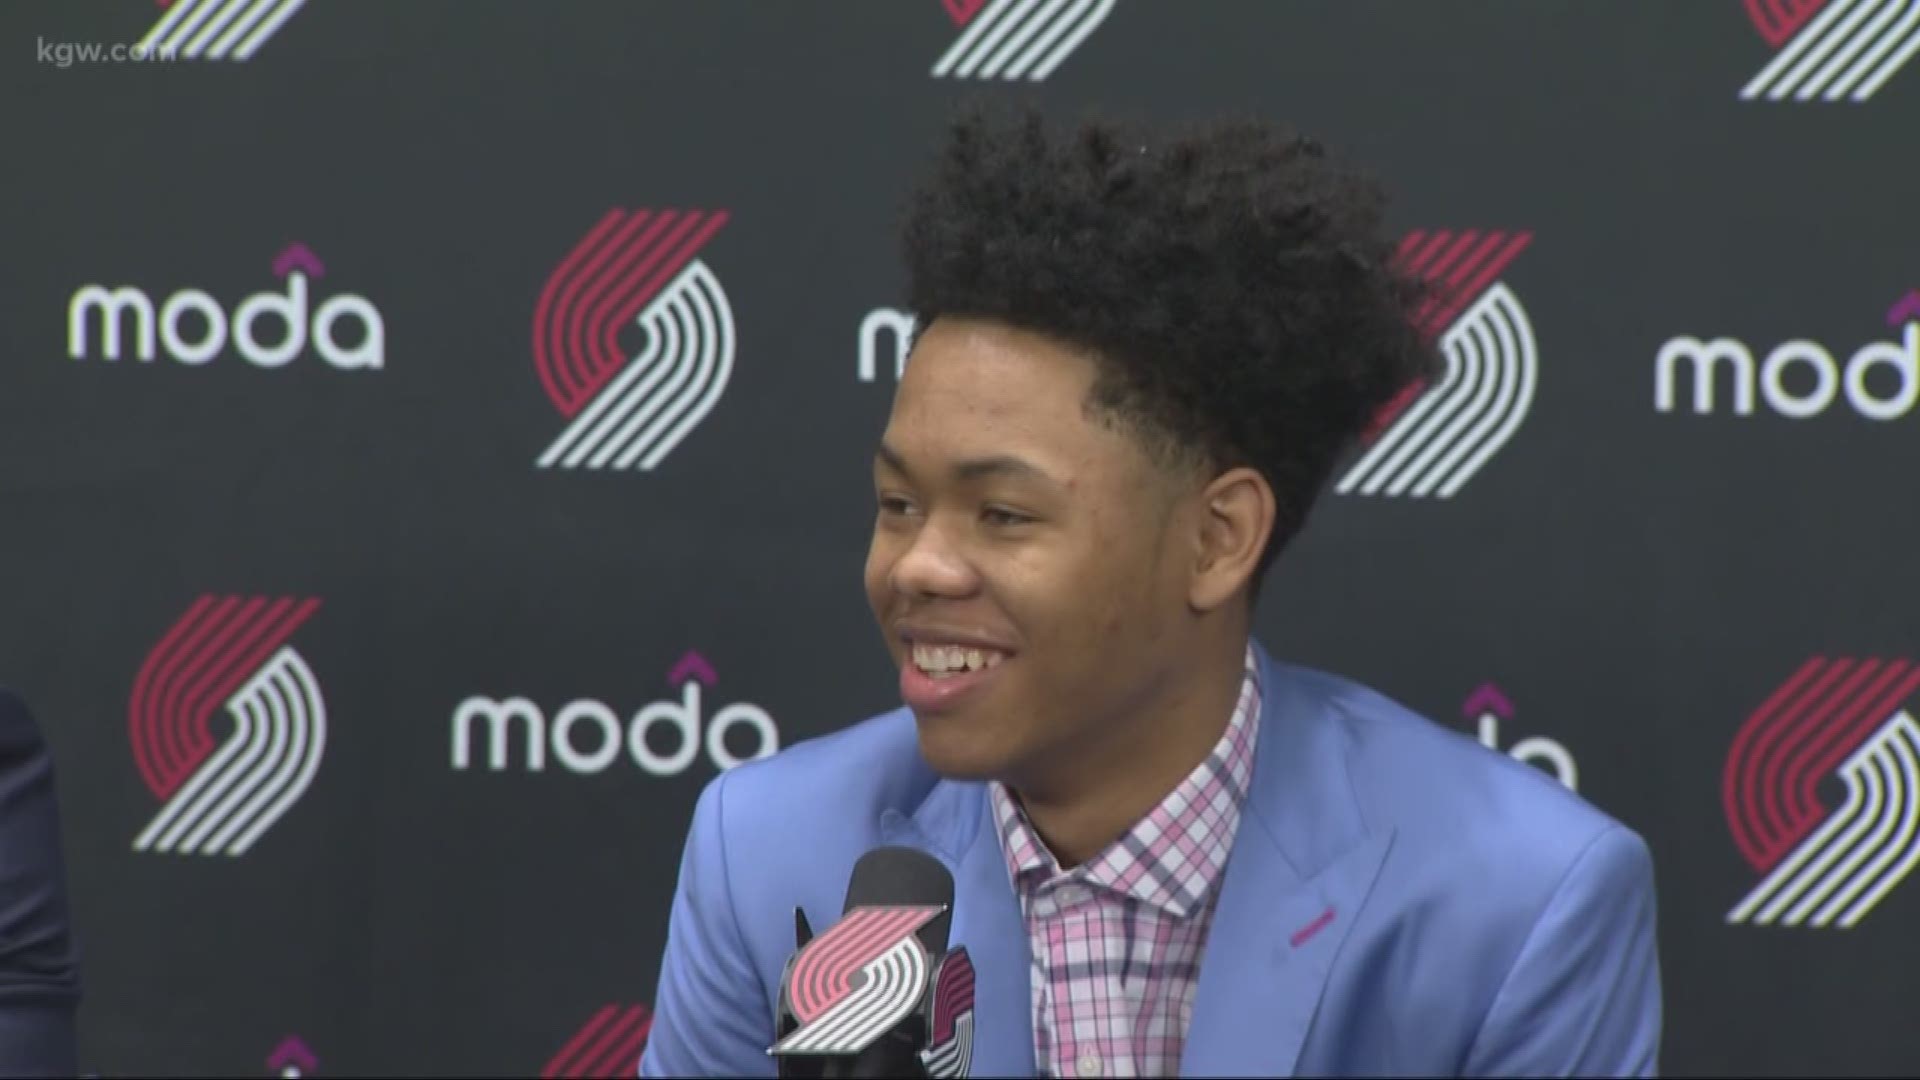 The Blazers introduced their first-round draft pick Anfernee Simons.